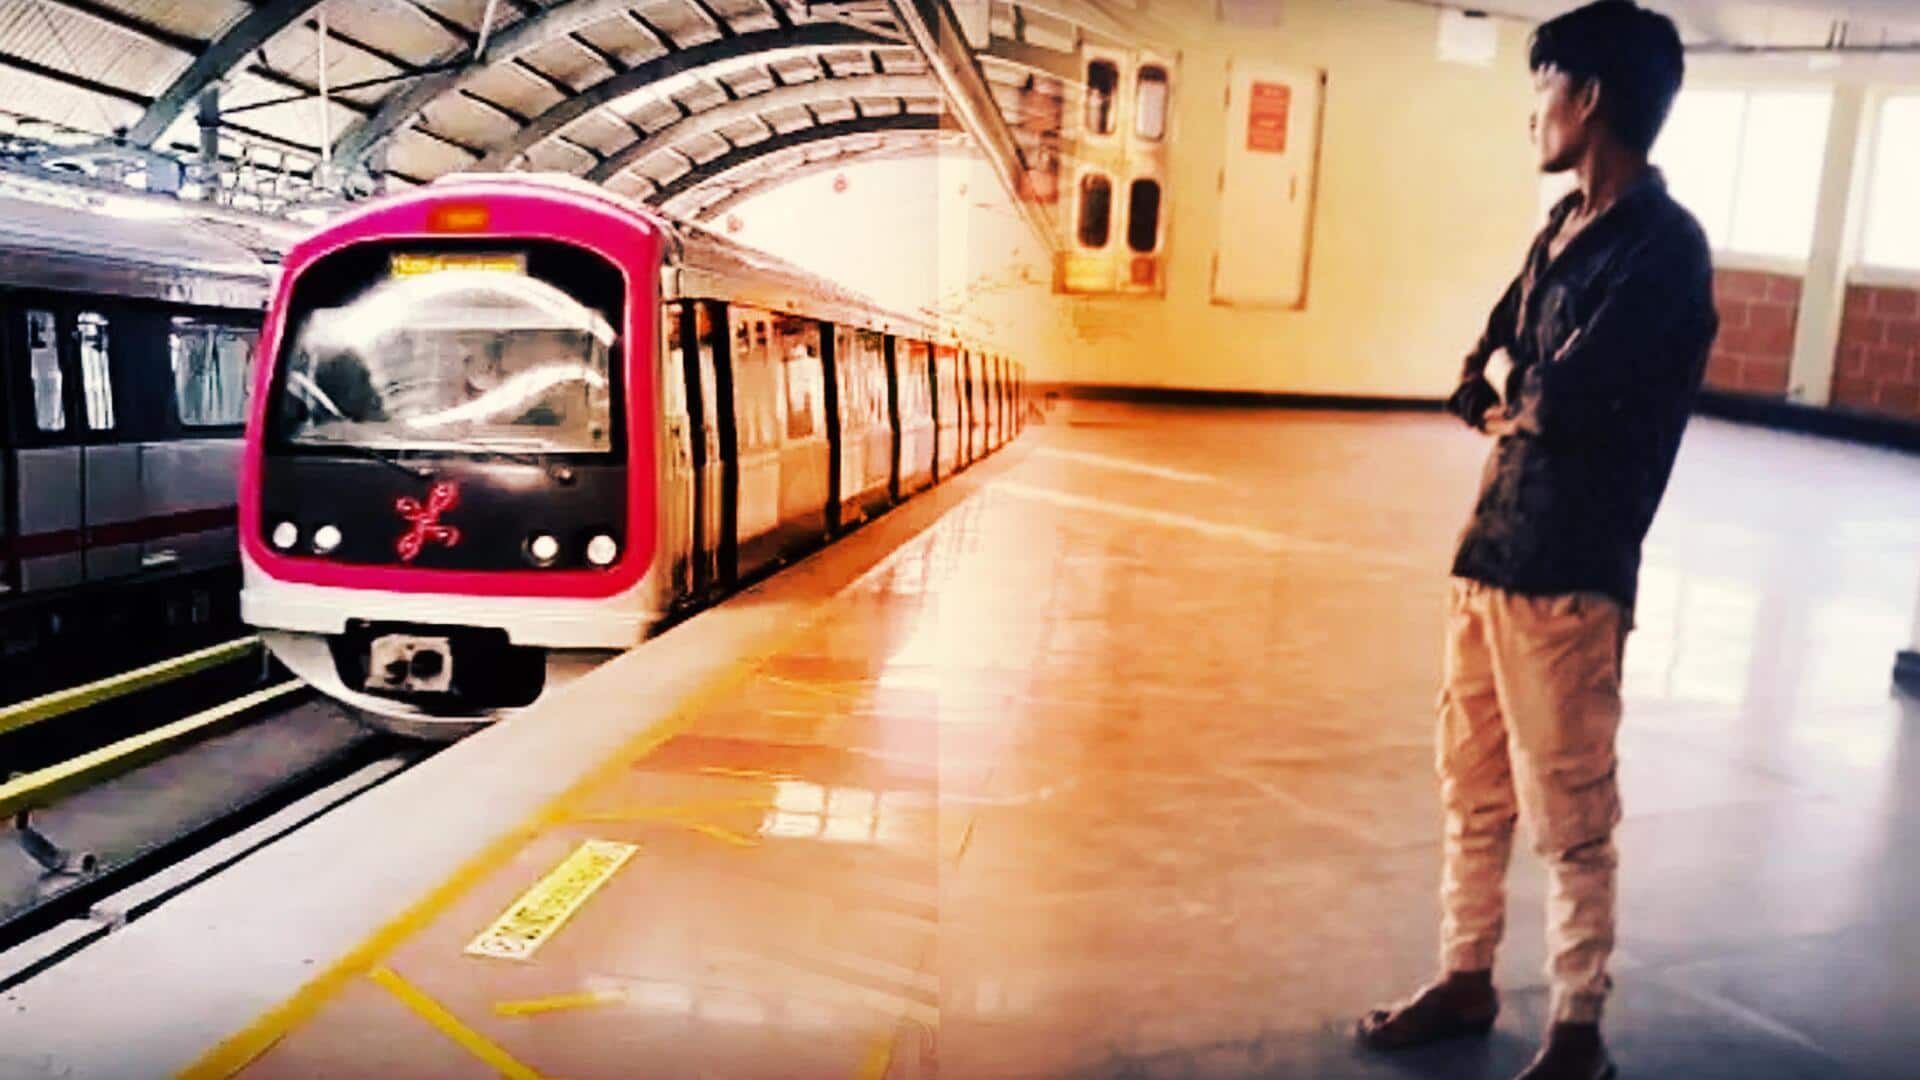 Bengaluru: Metro responds after reports claim laborer barred over clothes 